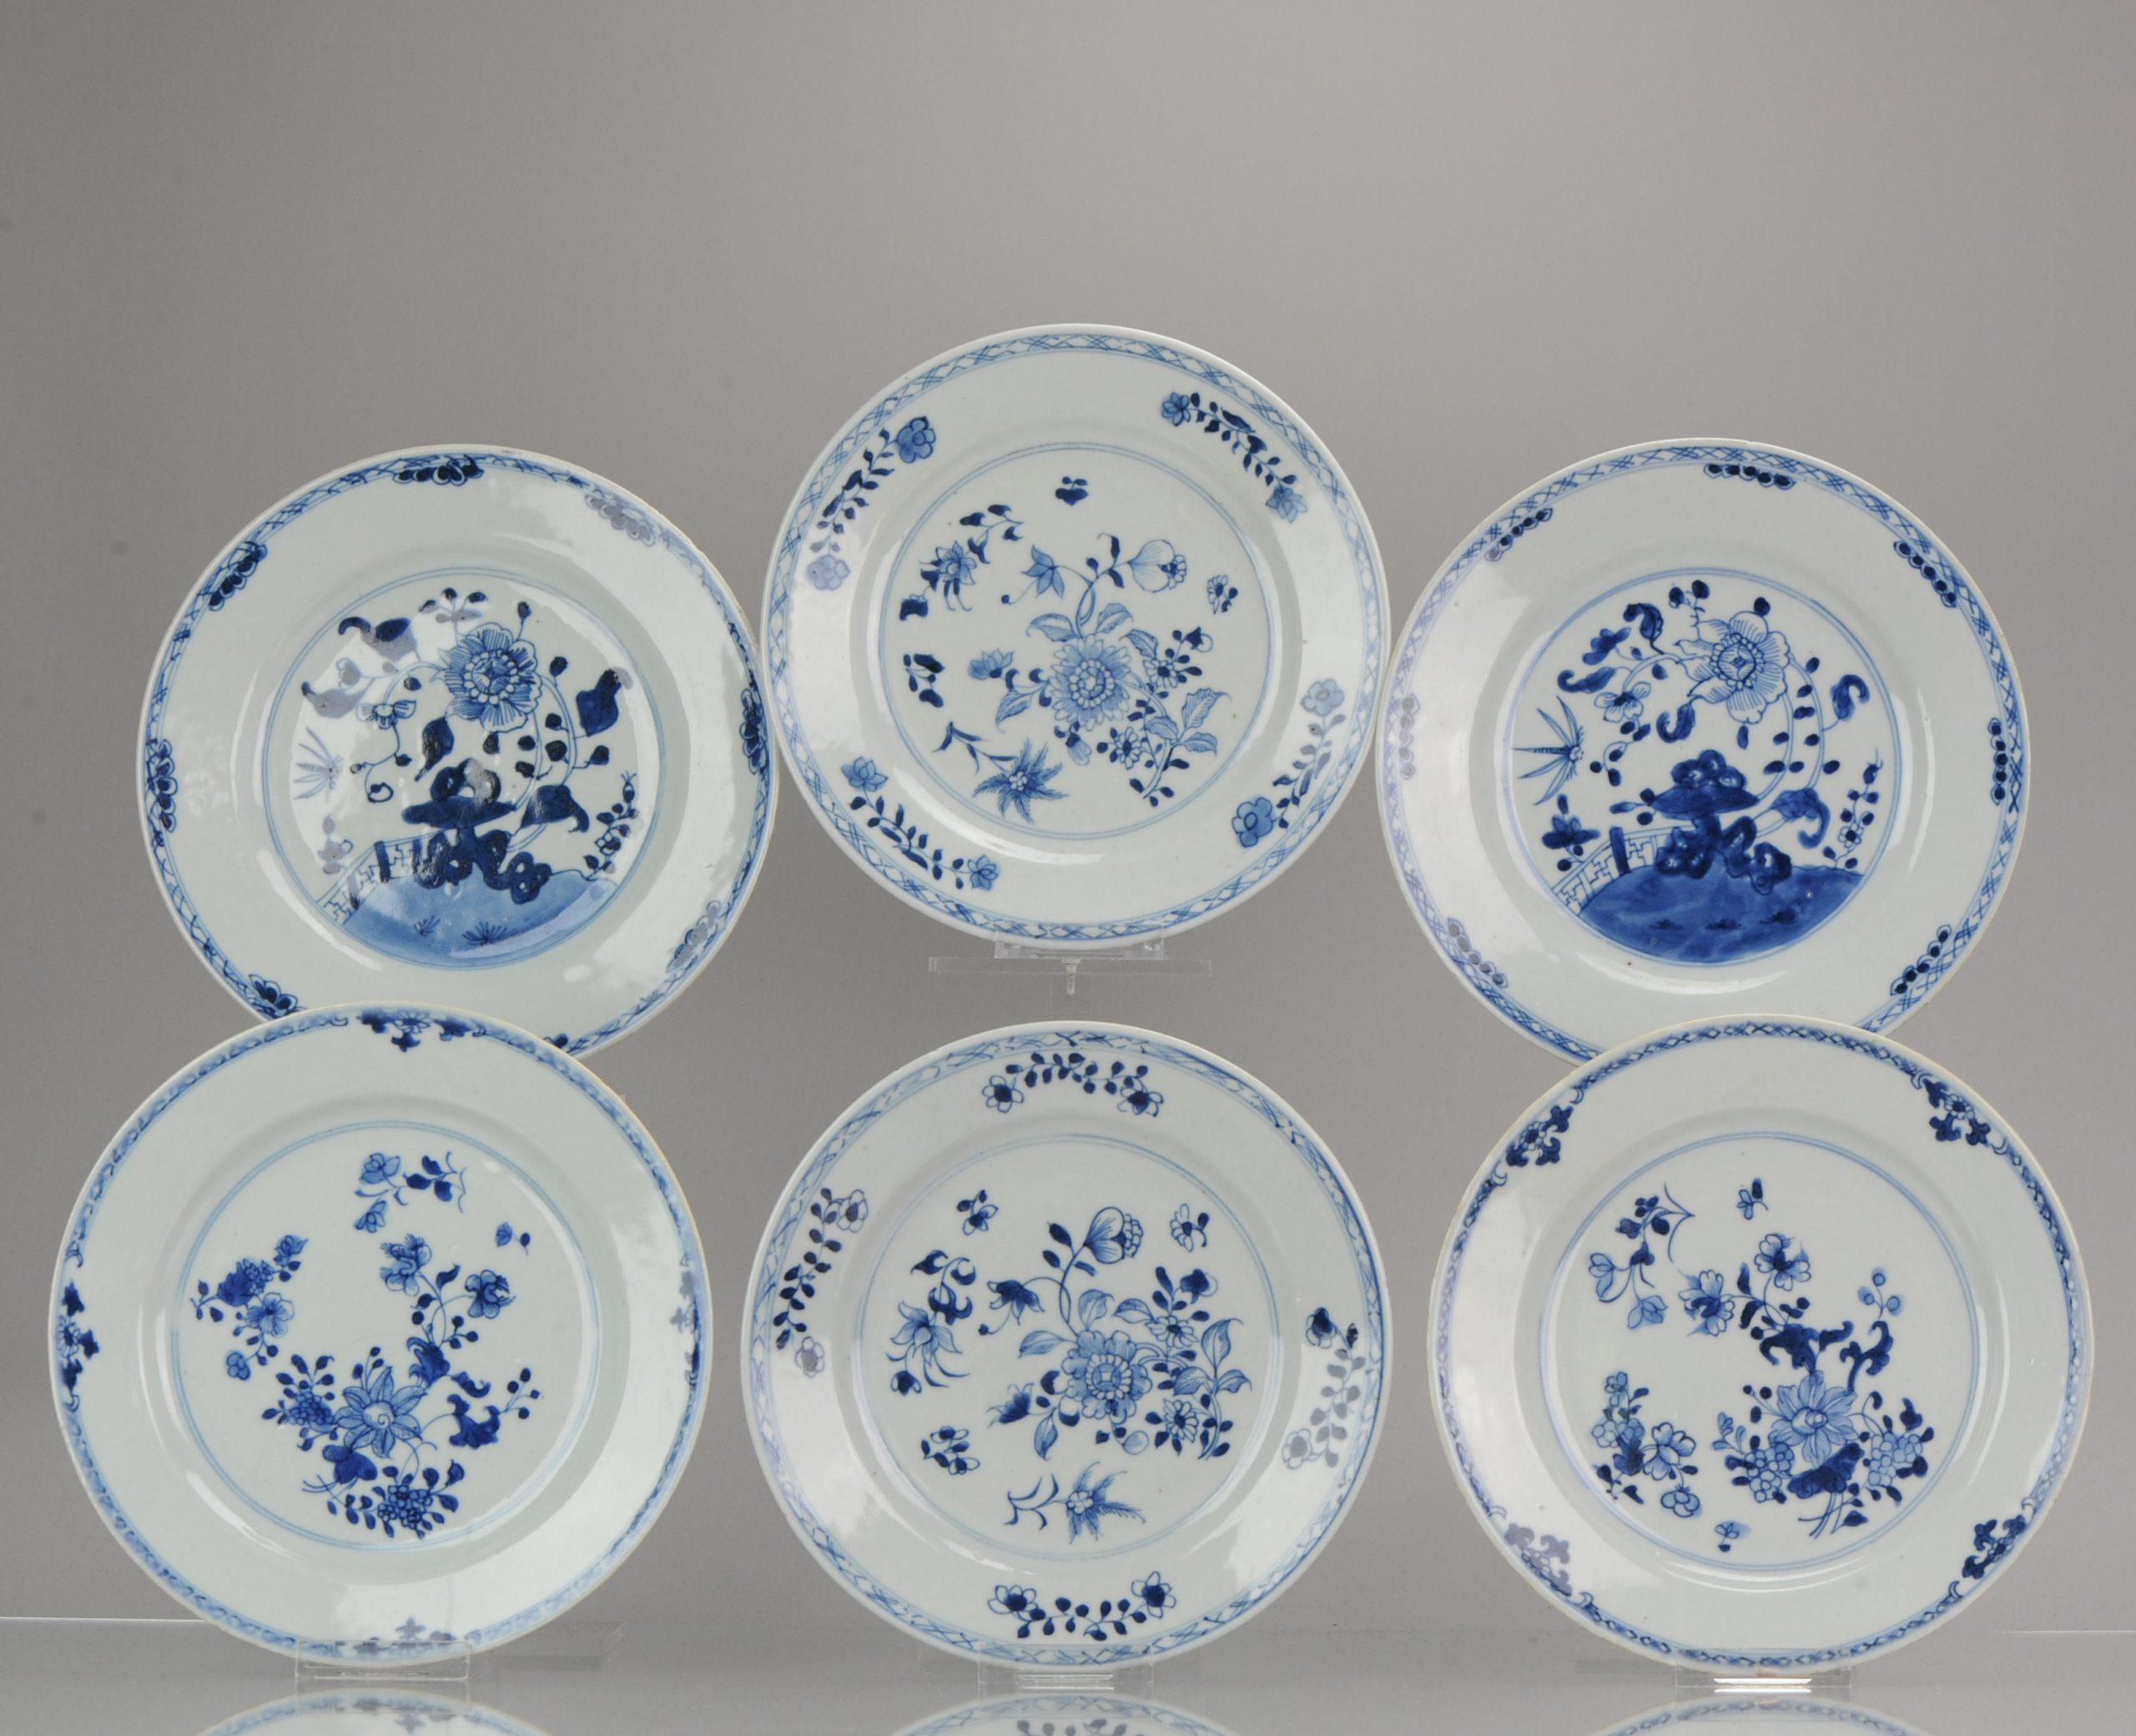 A very nicely decorated set of 6 plates. Dating to circa 1720-1740

A scene of peony

Peony

Peony - Mu-Dan - Queen of Flowers, the peony is a emblem of wealth and distinction.

Rock

Emblem of longevity, hardness and